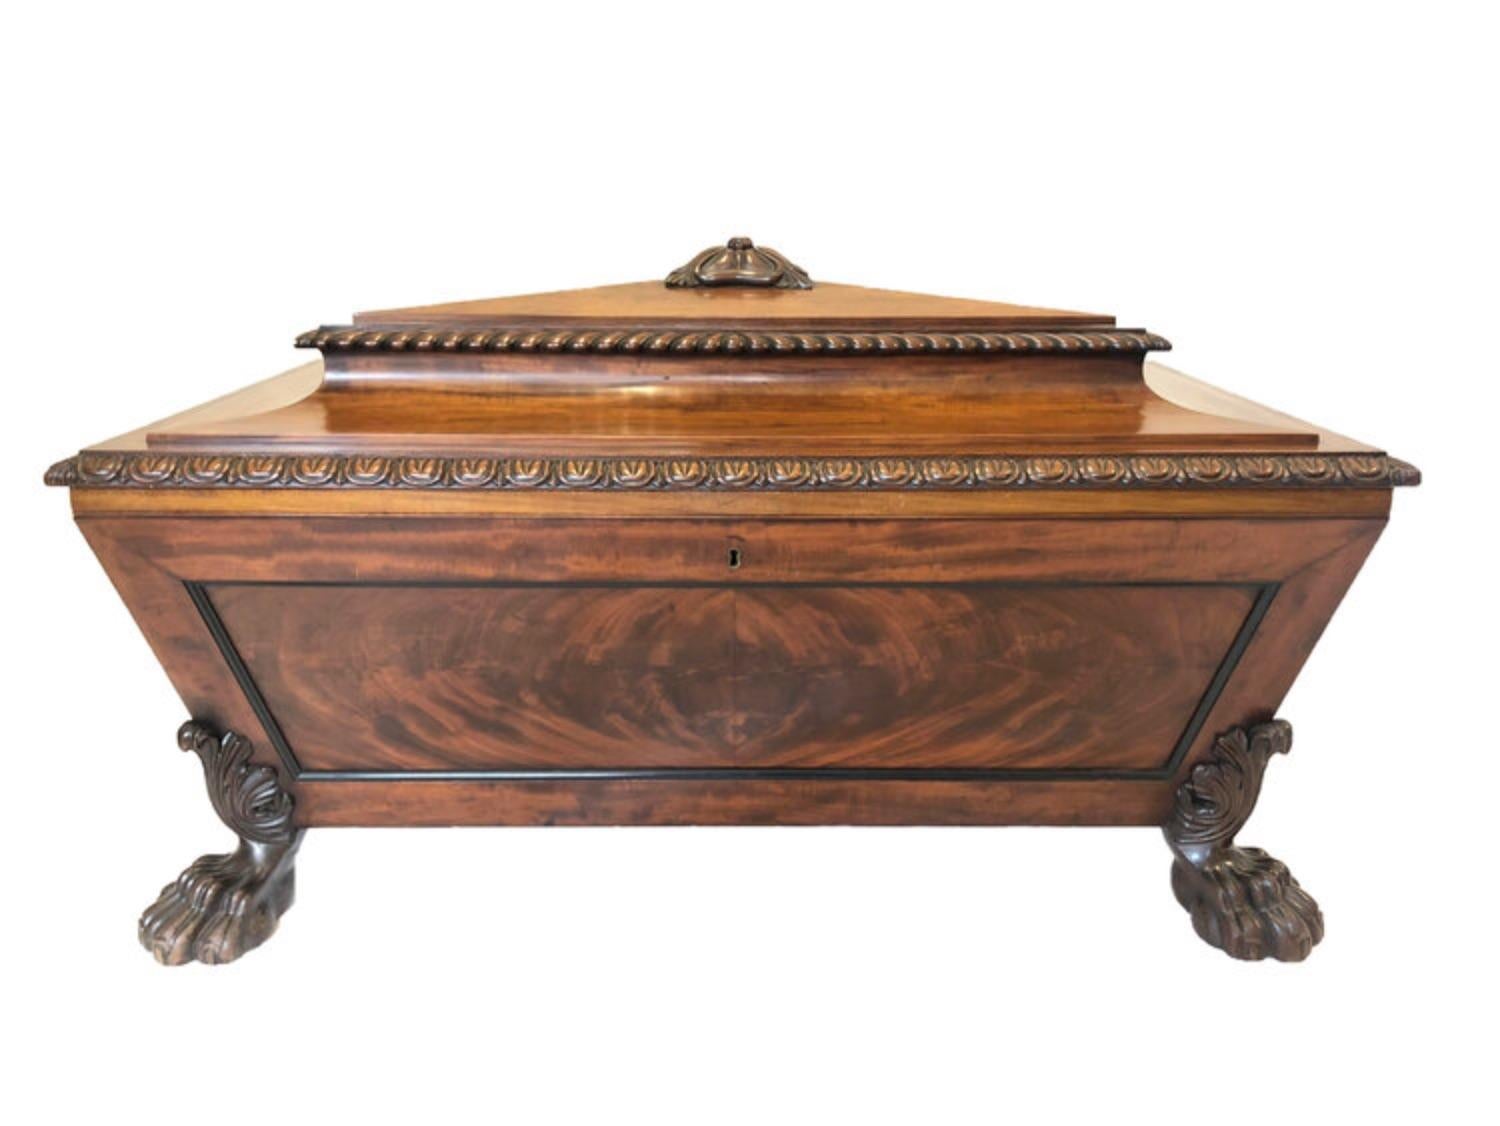 An extremely fine mahogany Sarcophagus celleret on bold claw feet of excellent original color and condition from the same dinning room as the sideboard,

circa 1780-1800.

Measures: 1180mm long

600mm wide

600mm high.